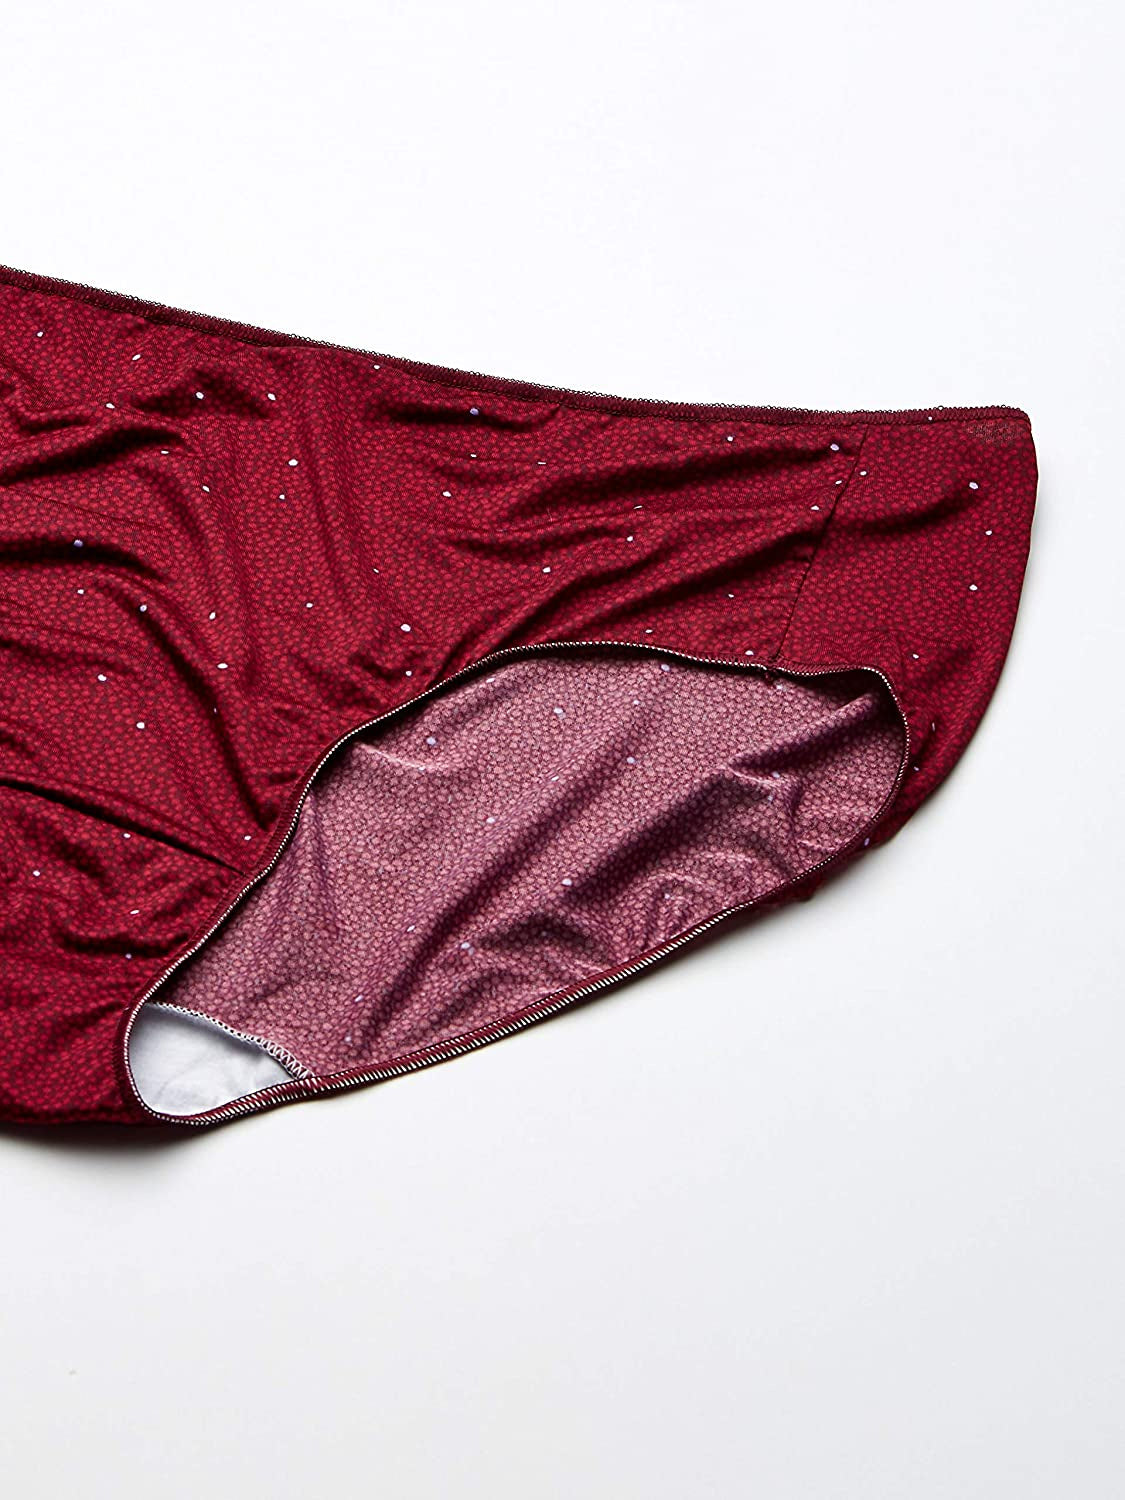 Just My Size Microfiber Panties for Women